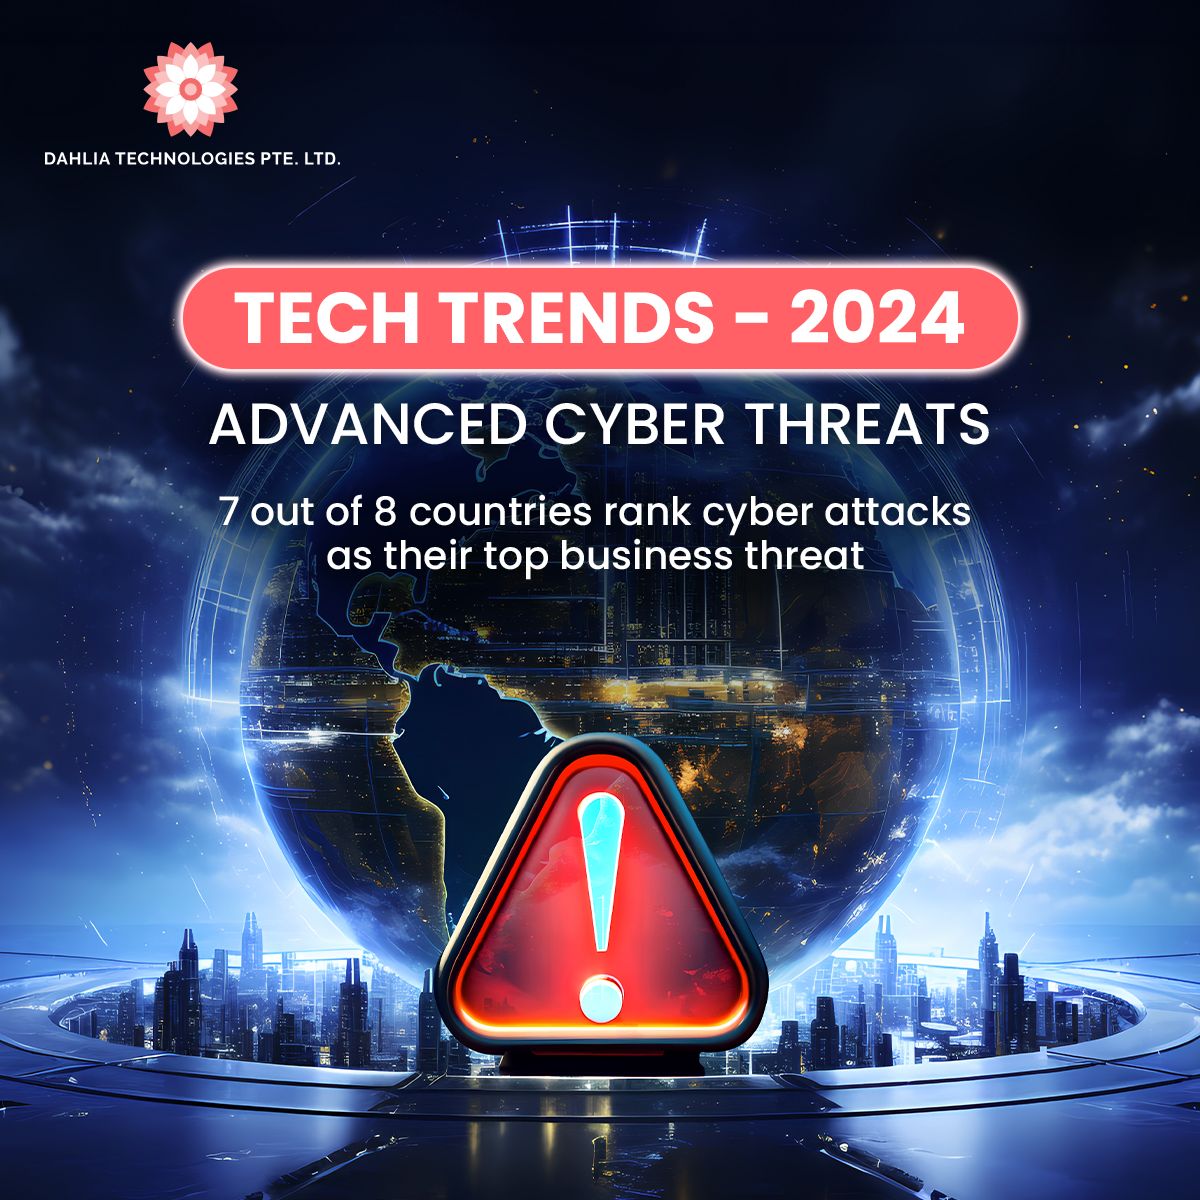 Navigating today's tech landscape means confronting evolving cyber threats head-on. Hiscox's 2022 survey found that 48% of companies faced attacks, with 20% suffering financial harm. Let us fortify your defenses. Contact us: dahlia.tech #CyberSecurity #DahliaTech #Web